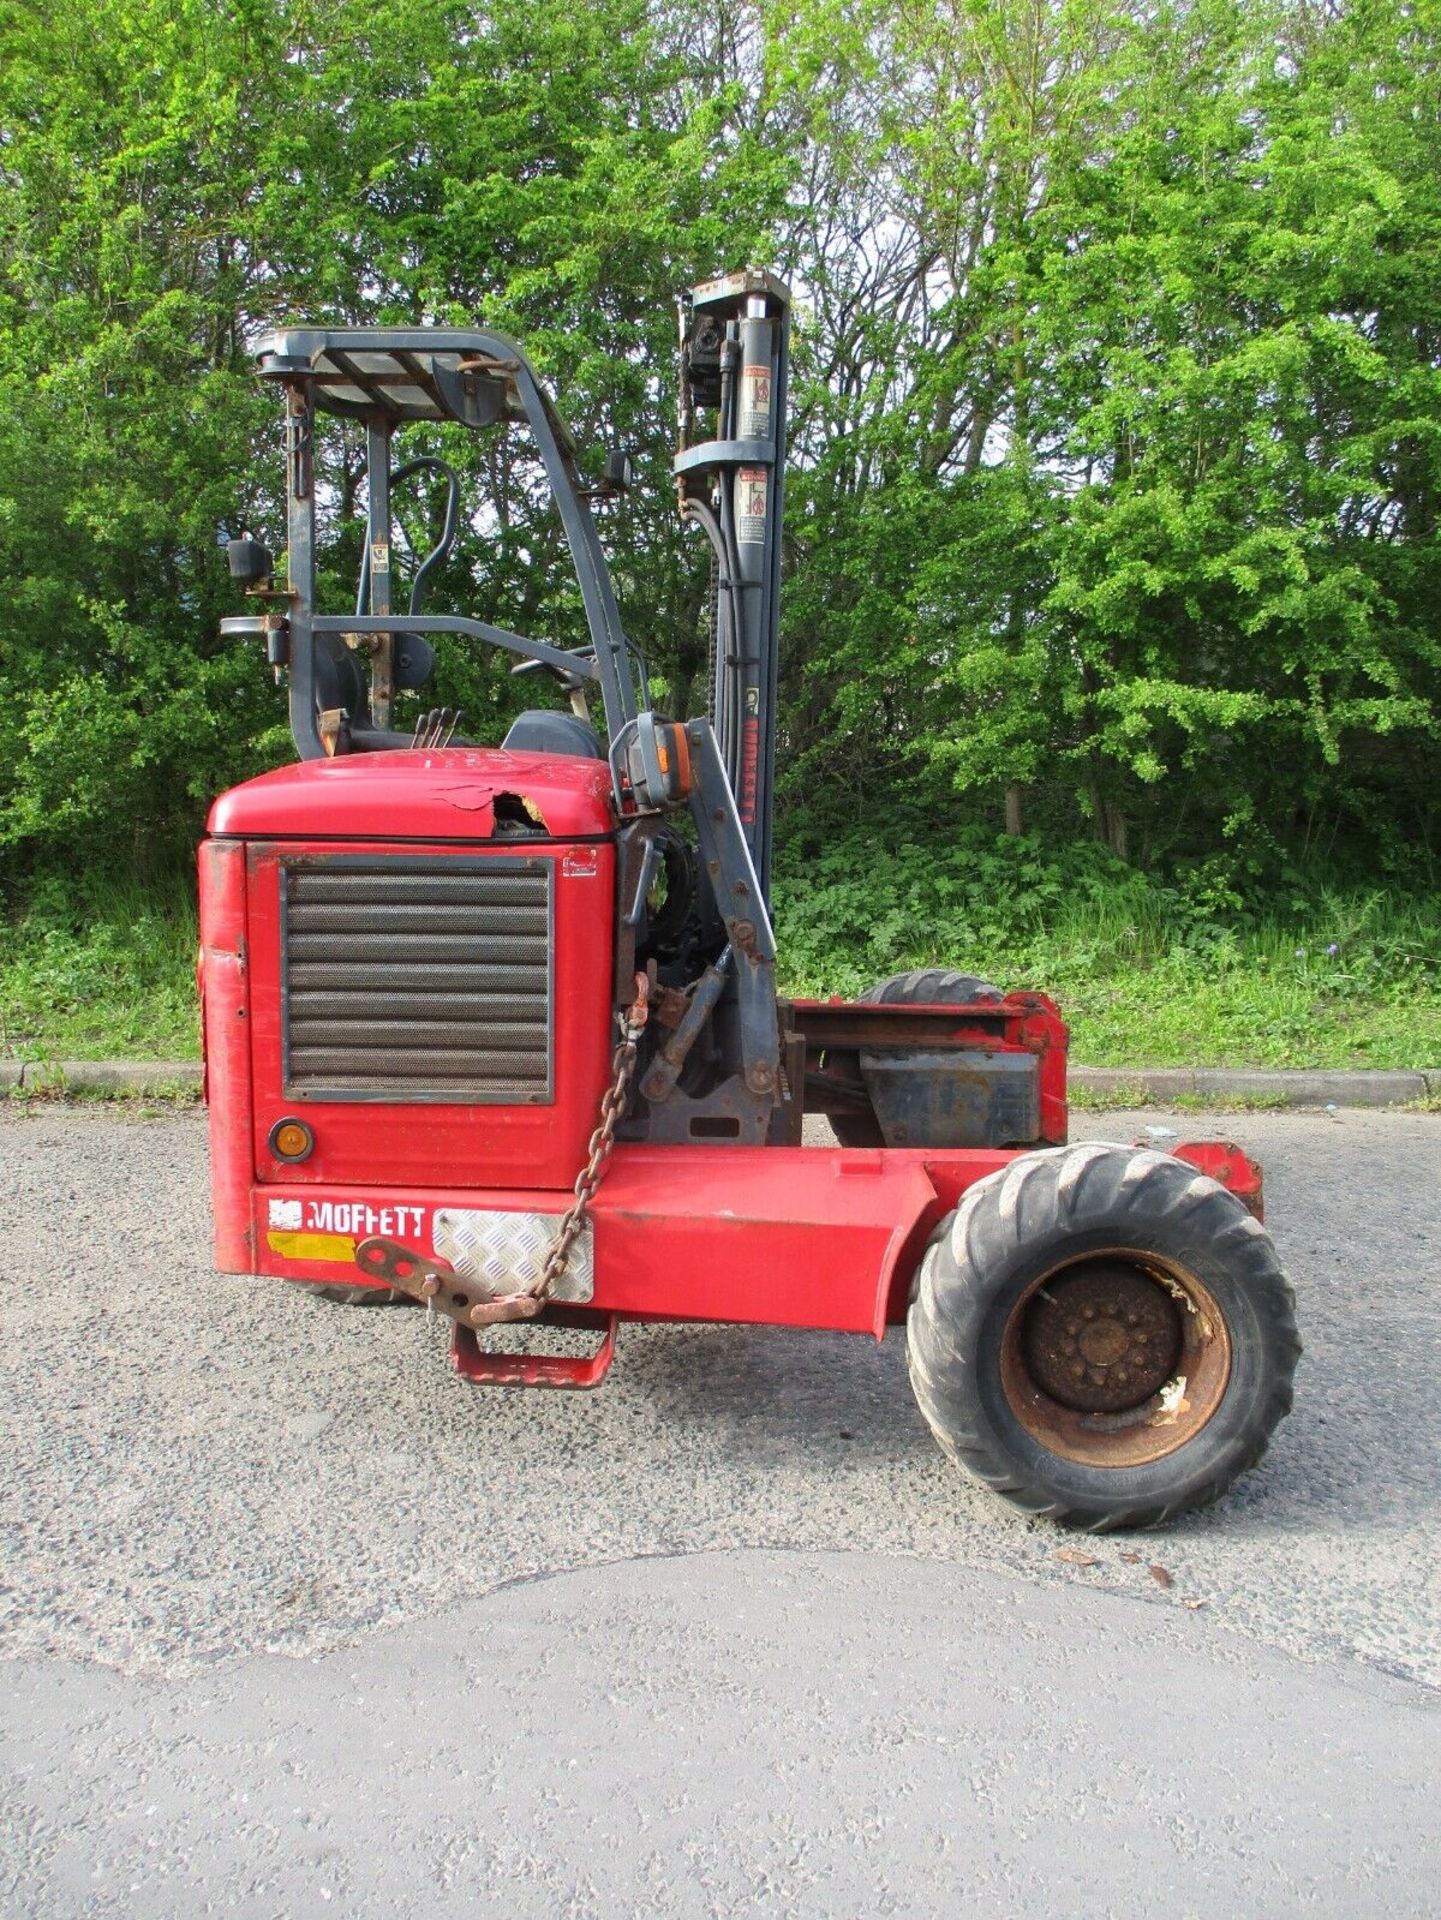 2008 MOFFETT MOUNTY M5 25.3 FORK LIFT FORKLIFT TRUCK MOUNTED DELIVERY ARRANGED - Image 10 of 14